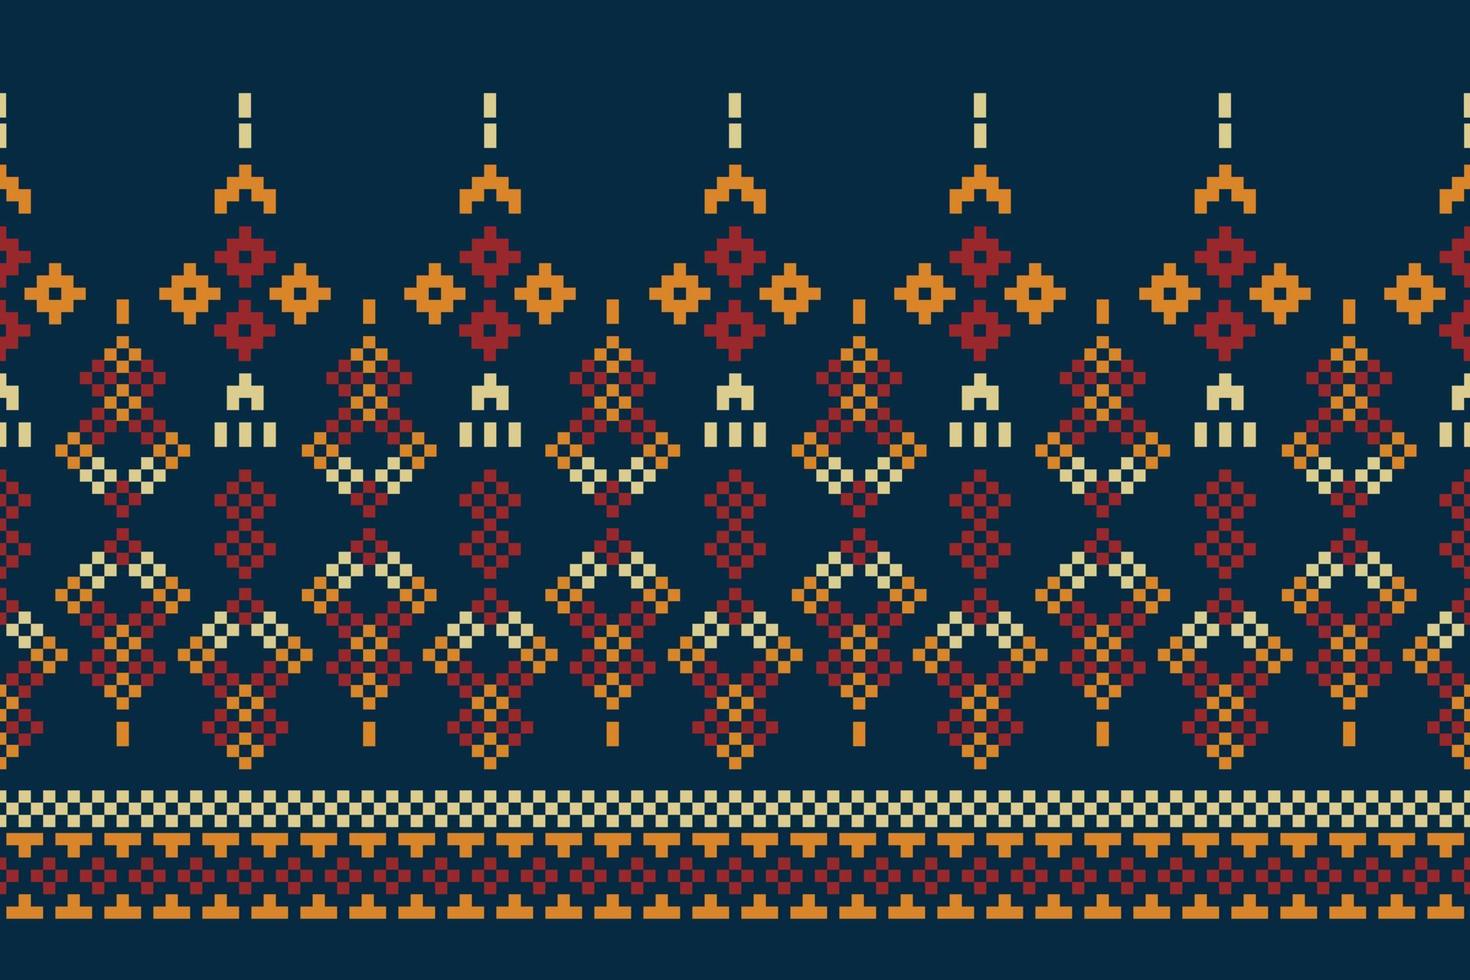 Ethnic geometric fabric pattern Cross Stitch.Ikat embroidery Ethnic oriental Pixel pattern navy blue  background. Abstract,vector,illustration.For texture,clothing,wrapping,decoration,carpet. vector